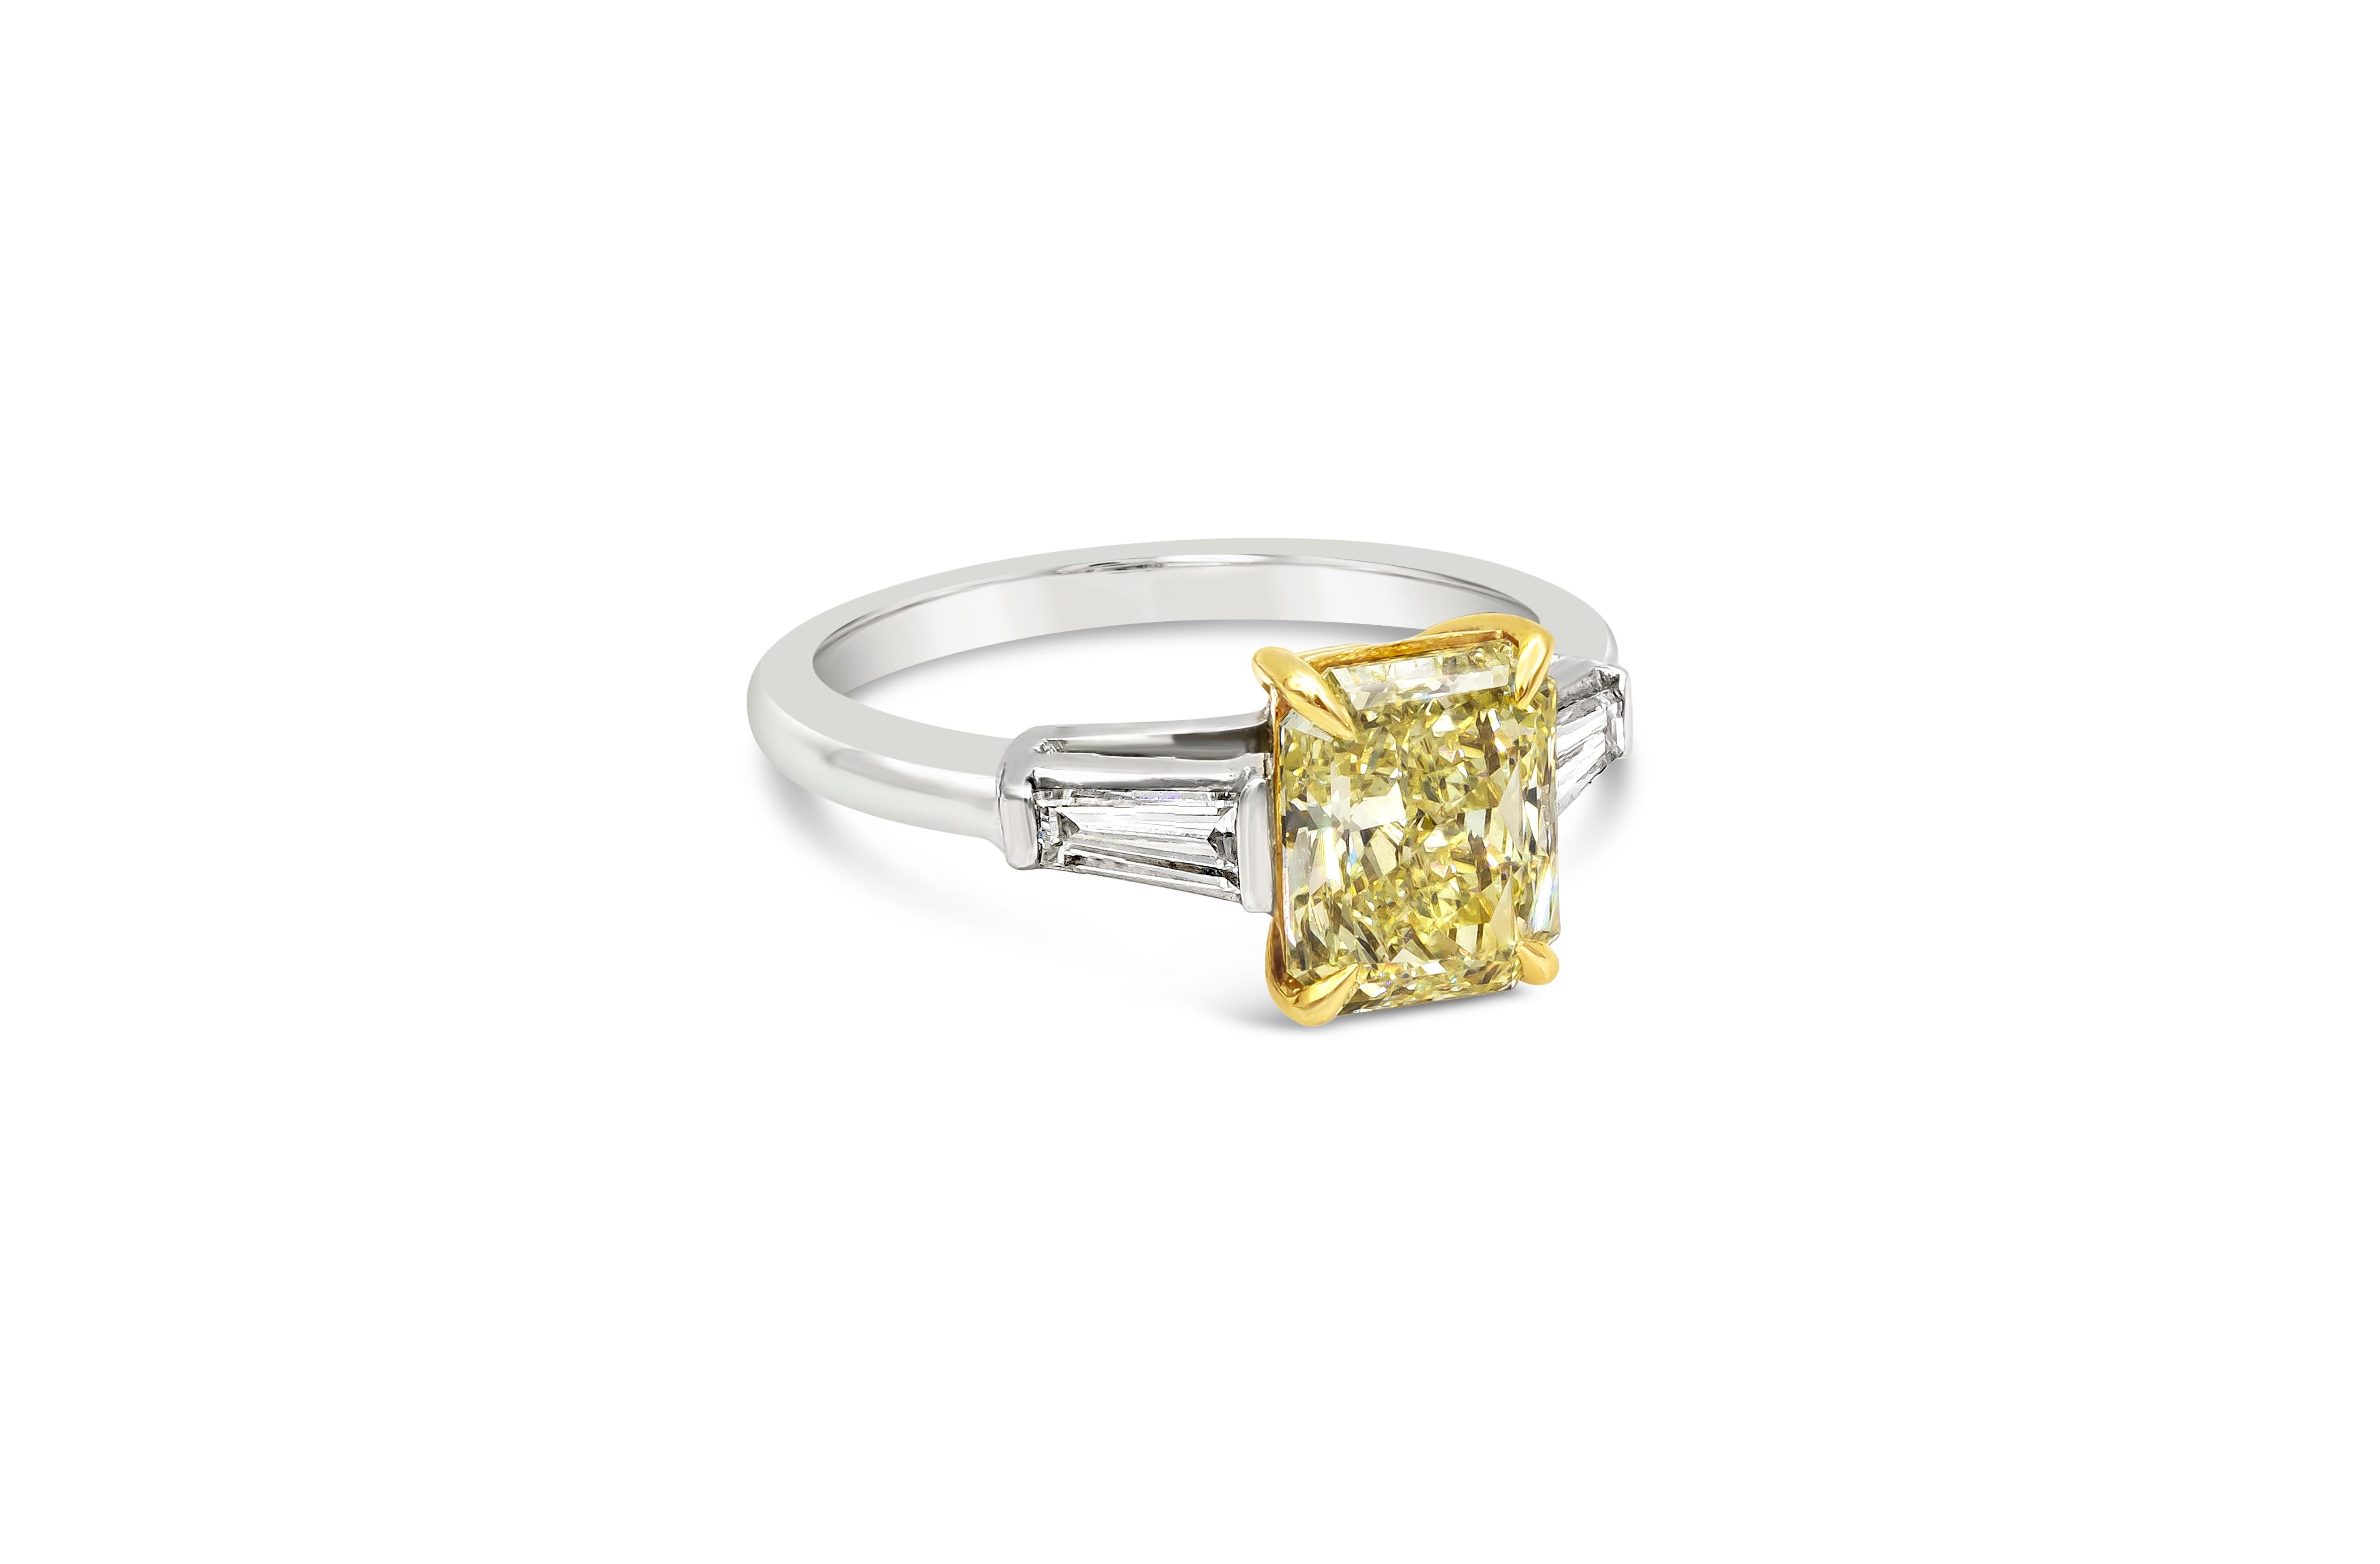 A classic engagement ring style showcasing a 2.05 carat radiant cut diamond certified by GIA as Fancy Light Yellow, VVS2 clarity. Flanking the center diamond are tapered baguette diamonds on either side. Set in a polished platinum mounting. Size